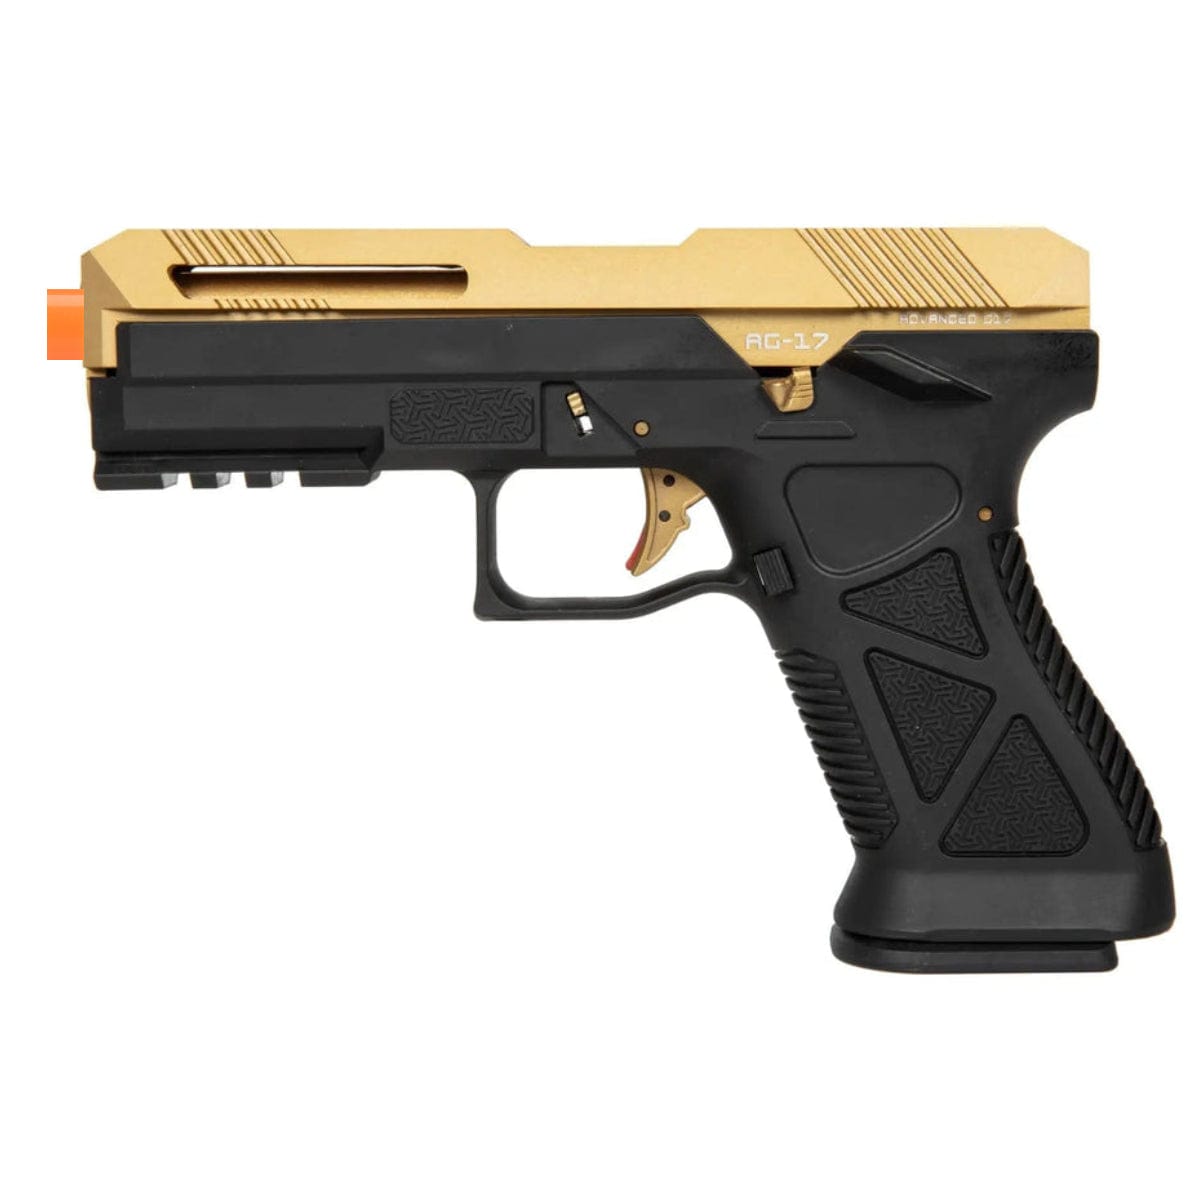 Airsportinggoods HFC HG182 AG17 SCORPION GAS AIRSOFT PISTOL GOLD